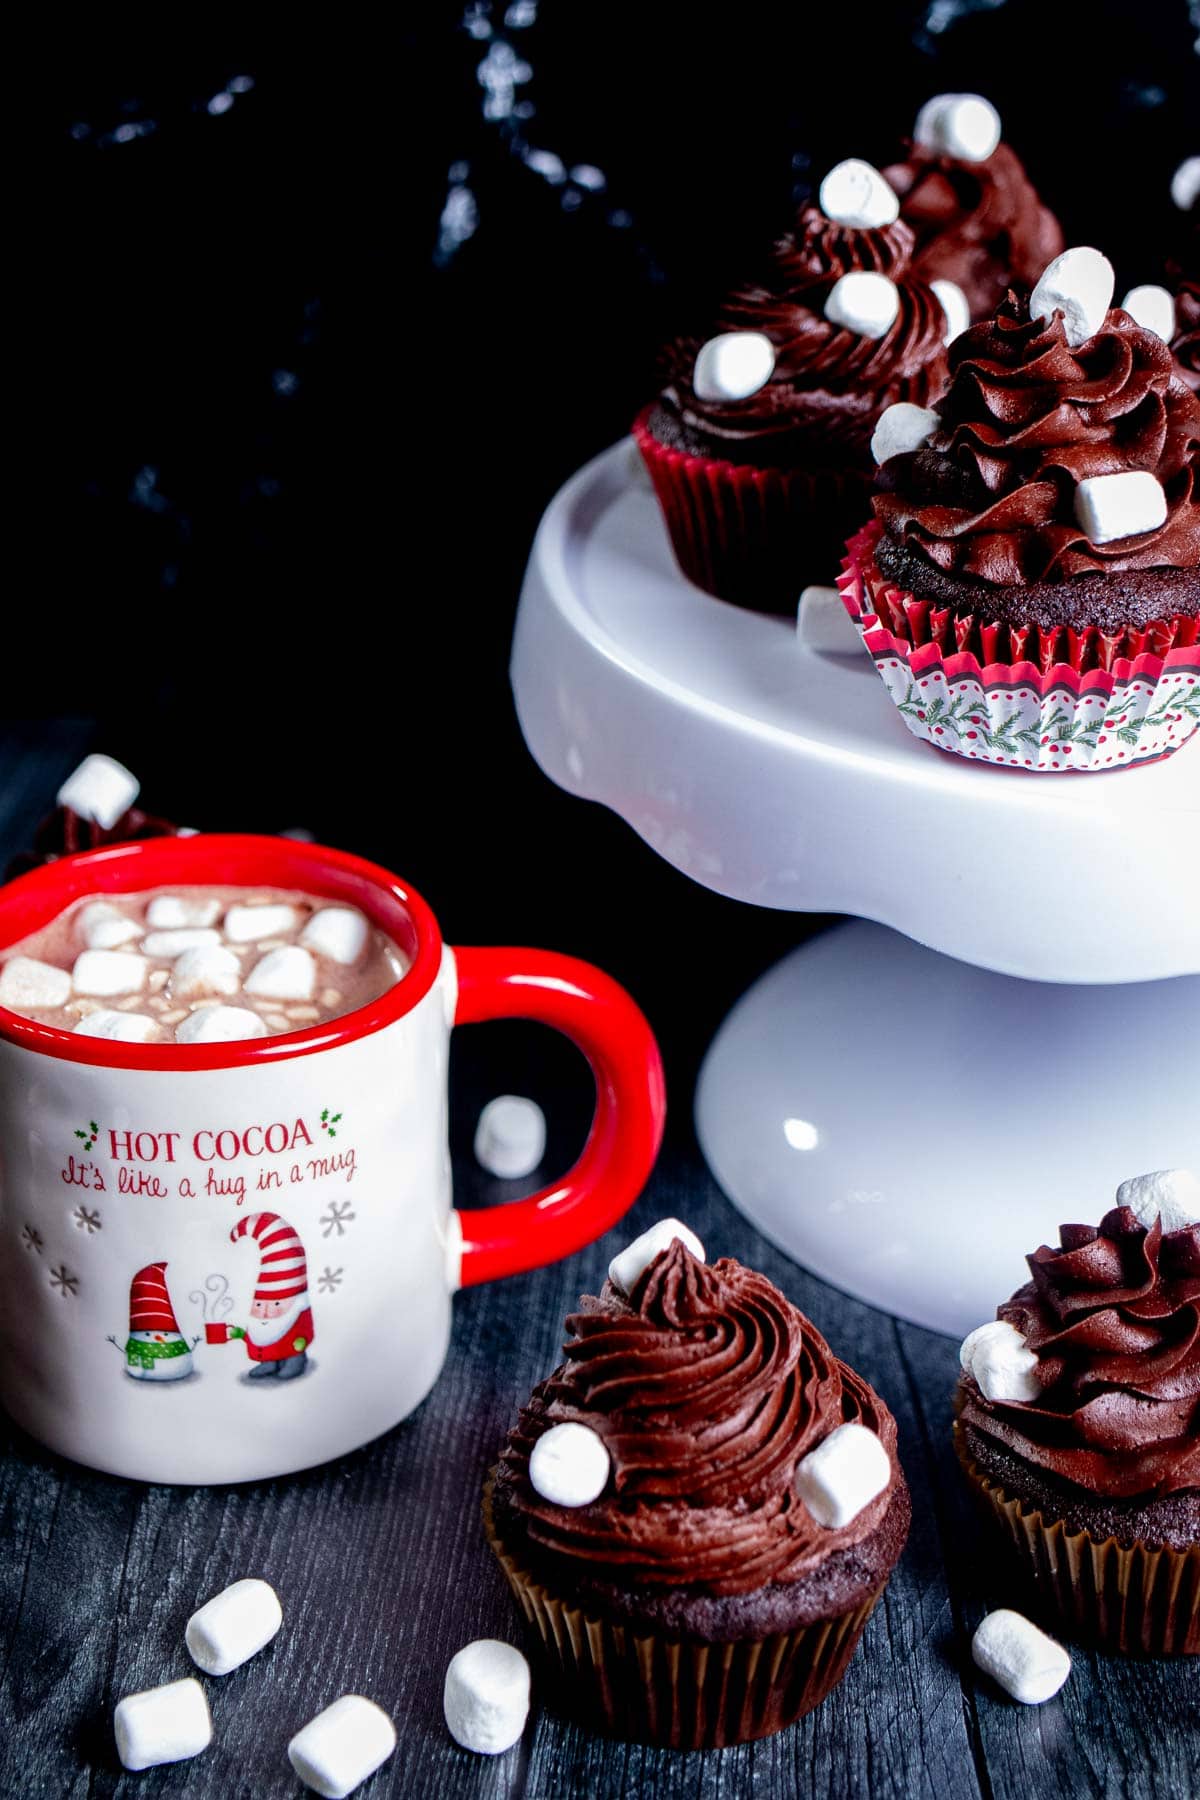 Angled view above a bunch of chocolate cupcakes on wood by a mug of hot chocolate with marshmallows and a white cake stand with more cupcakes on it.